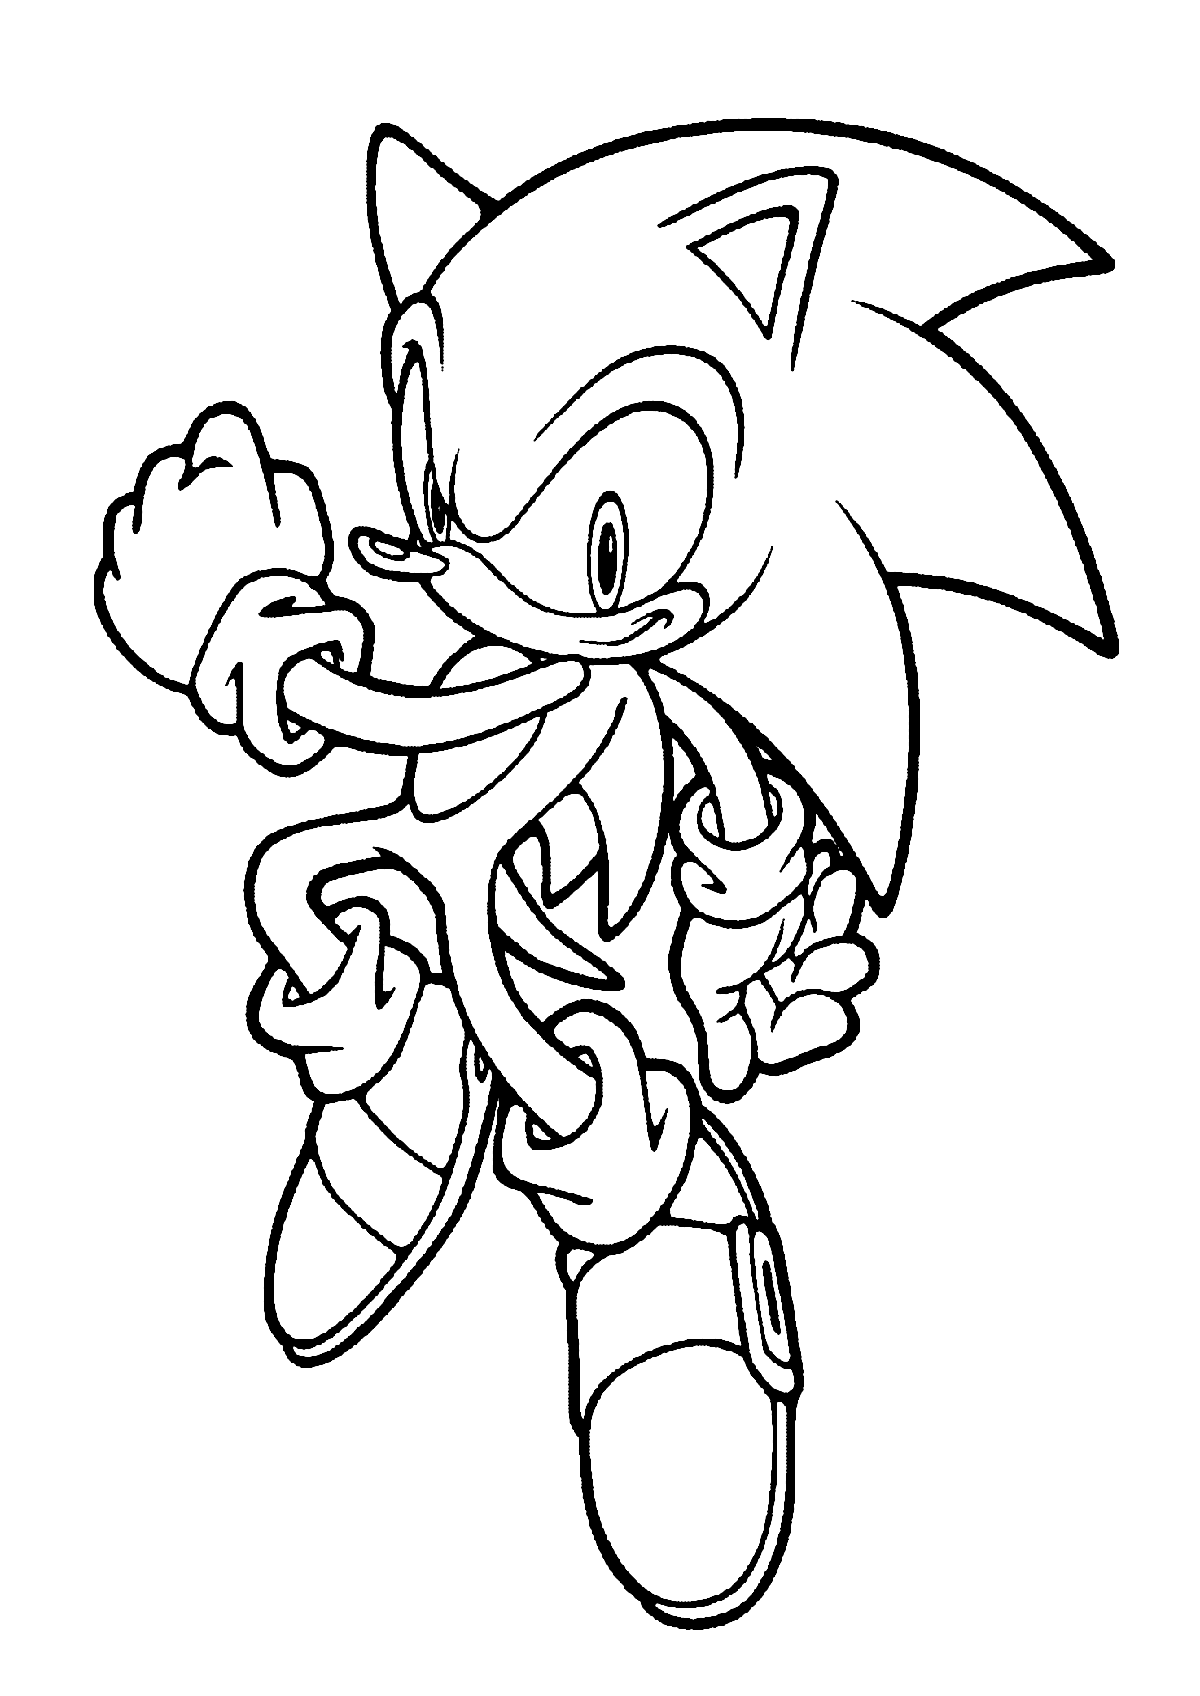 Sonic X Coloring pages 🖌 to print and color